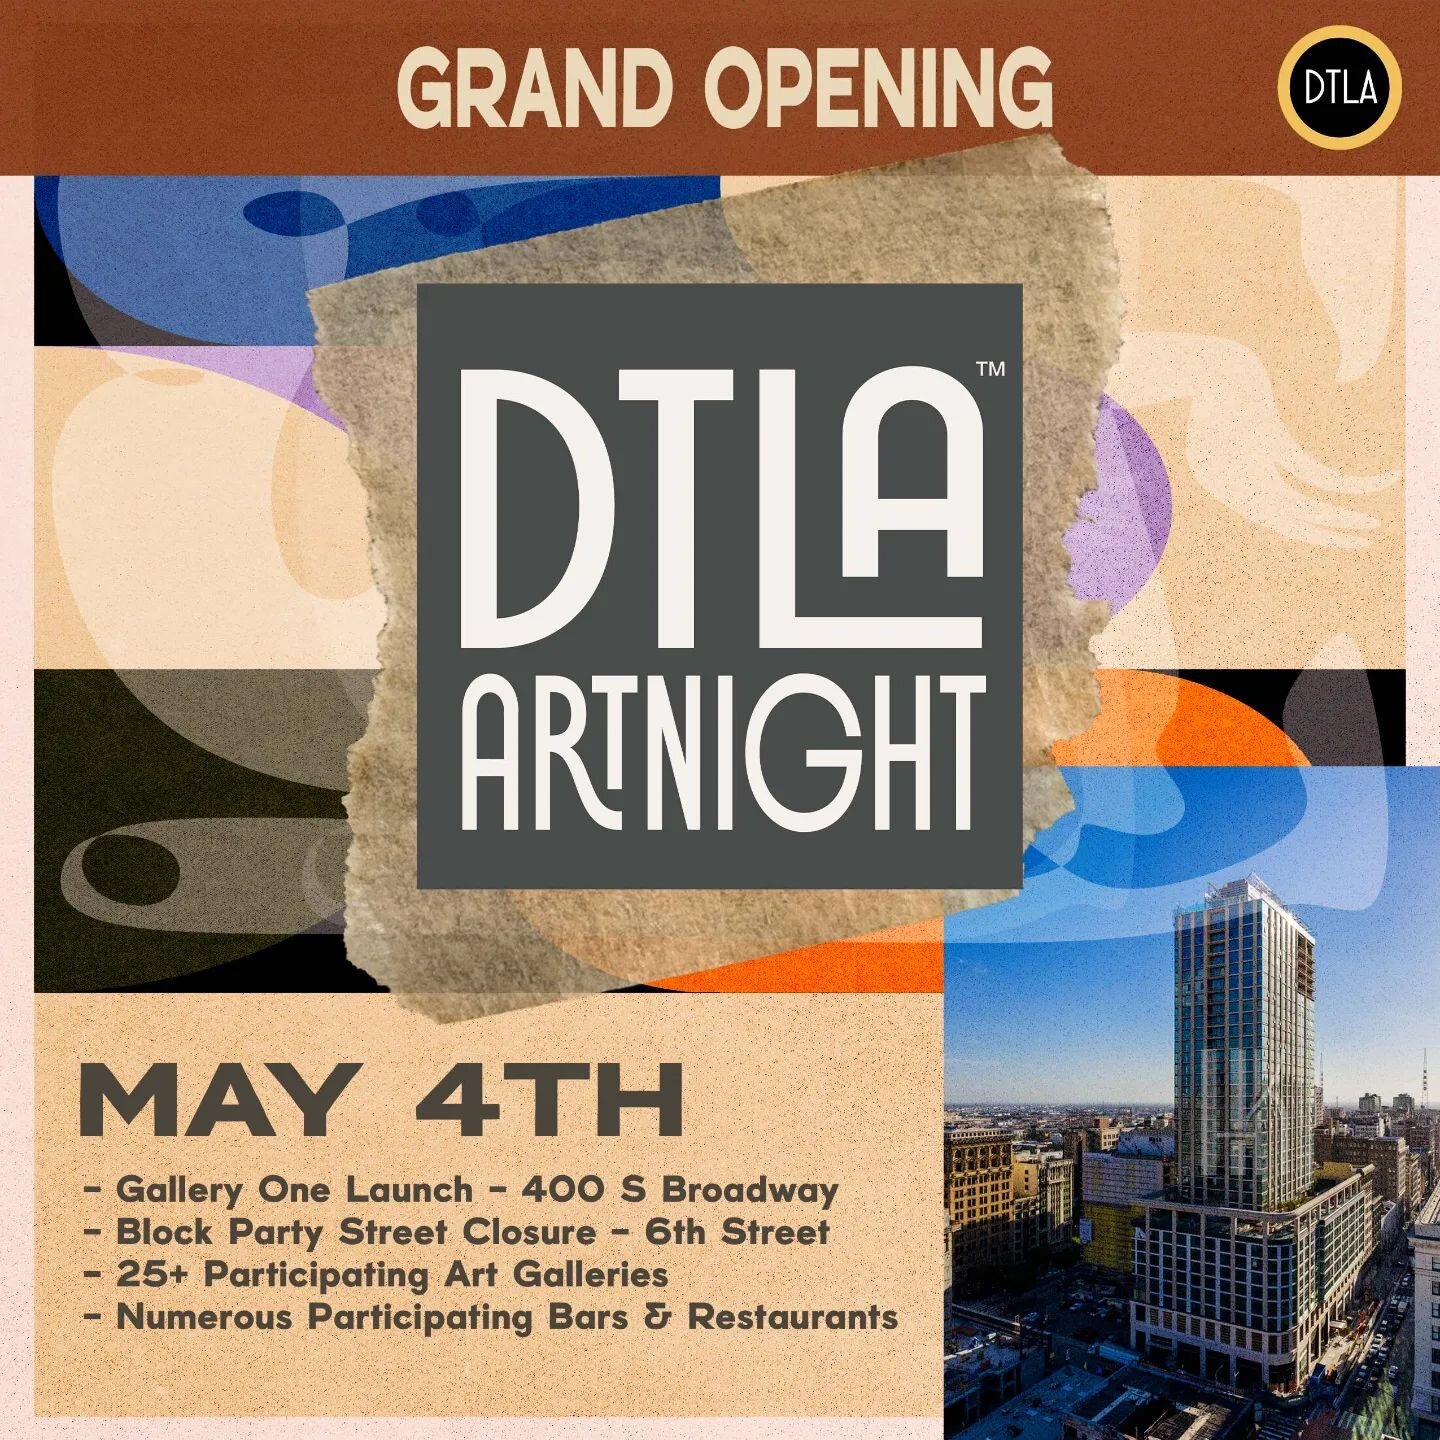 ⁠⠀⠀⠀⠀⠀⠀⠀⠀⠀
DTLA Art Night 🎨
#FirstThursdays By @HappeningInDTLA
⁠⠀⠀⠀⠀⠀⠀⠀⠀⠀
@DTLAArtNight launches May 4th with over 25 Galleries participating, a block party/street closure at 6th street between Main &amp; Los Angeles and much much more coming each 